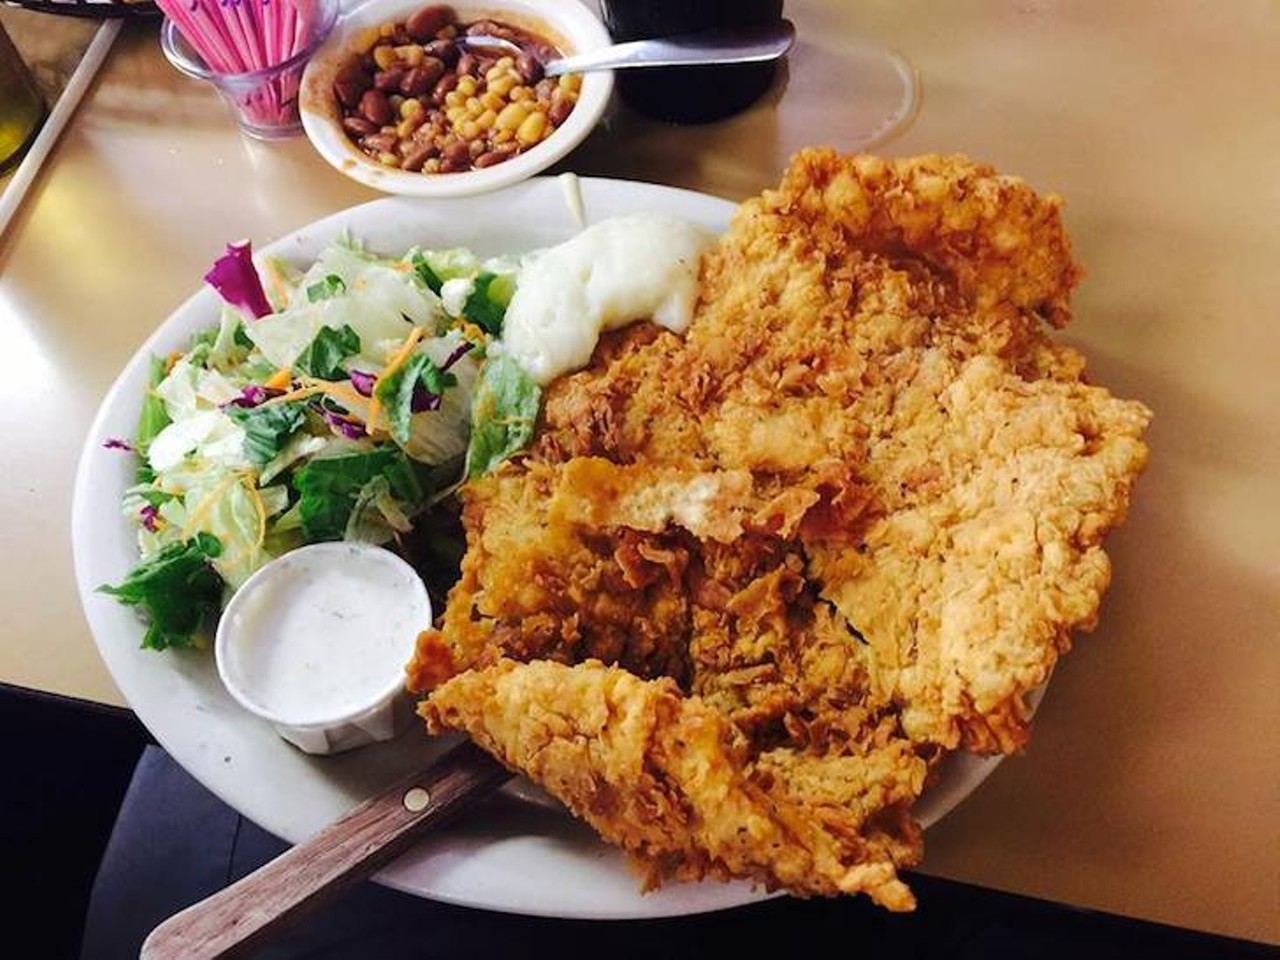  De Wese's Tip Top Cafe 
2814 Fredericksburg Rd., (210) 732-0191, dewesestiptopcafe.com
De Wese's is a homestyle cafe known for serving up delicious chicken-fried steak and pie since 1938.
Photo via Facebook (Dewese's Tip Top Cafe Fredericksburg Rd.)